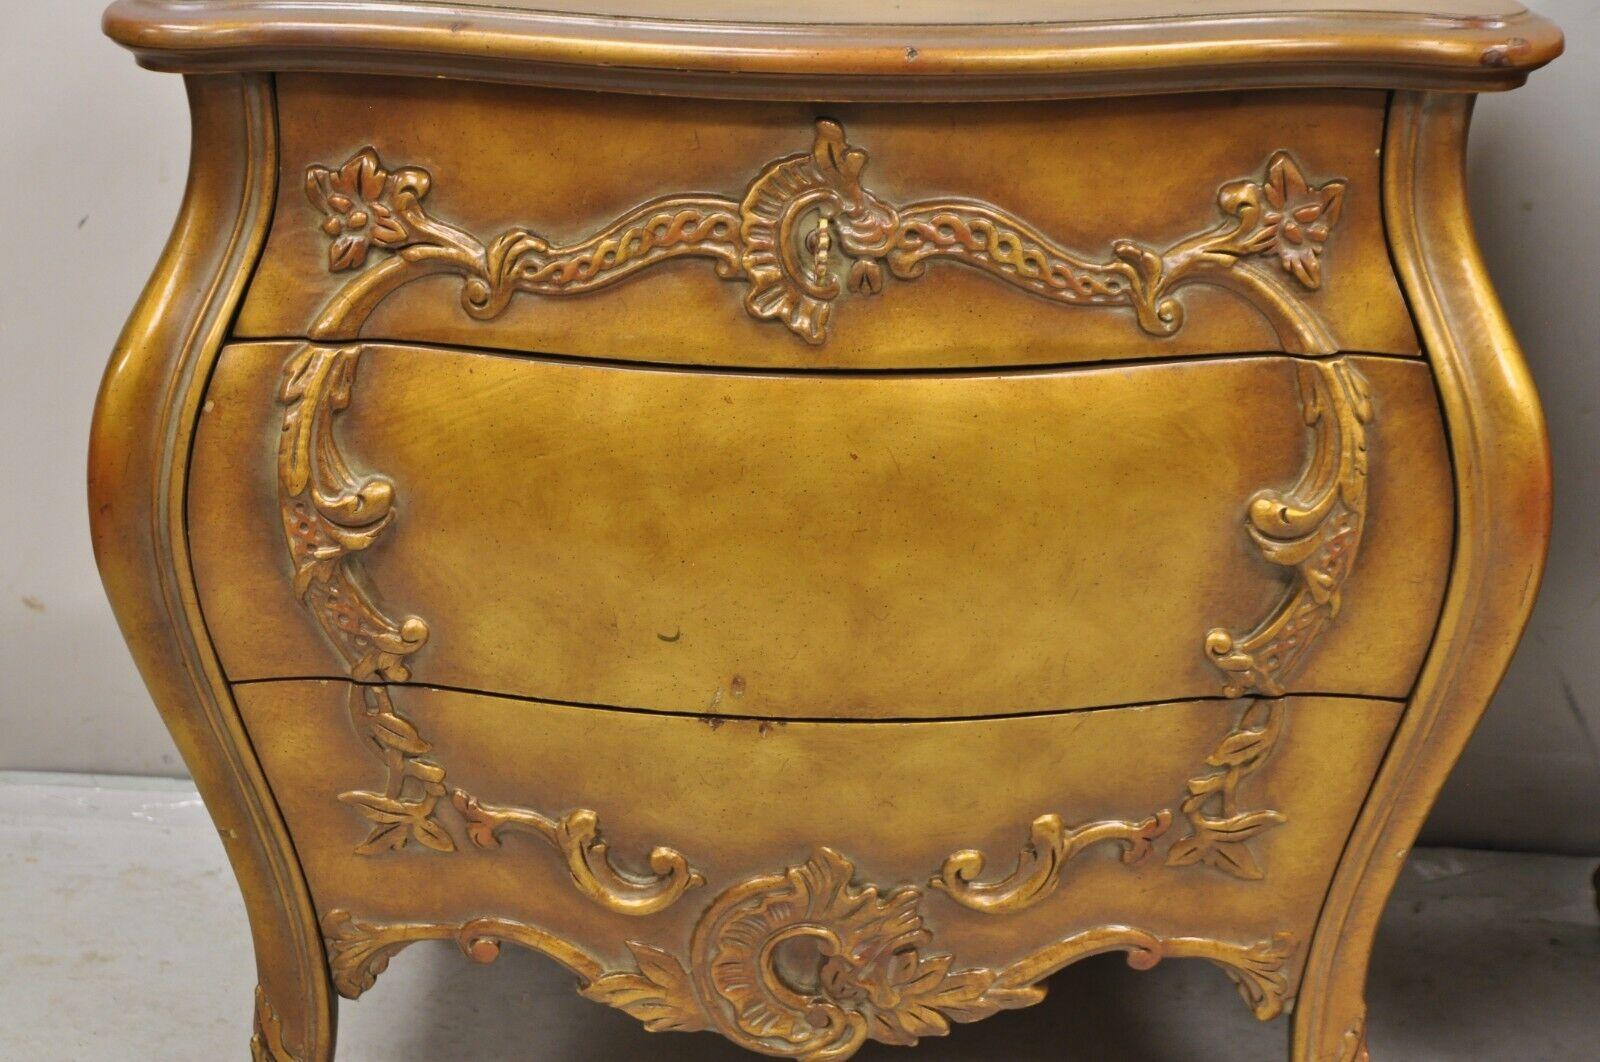 Wood Vintage French Rococo Baroque Style Gold Gilt Bombe Nightstands - a Pair For Sale